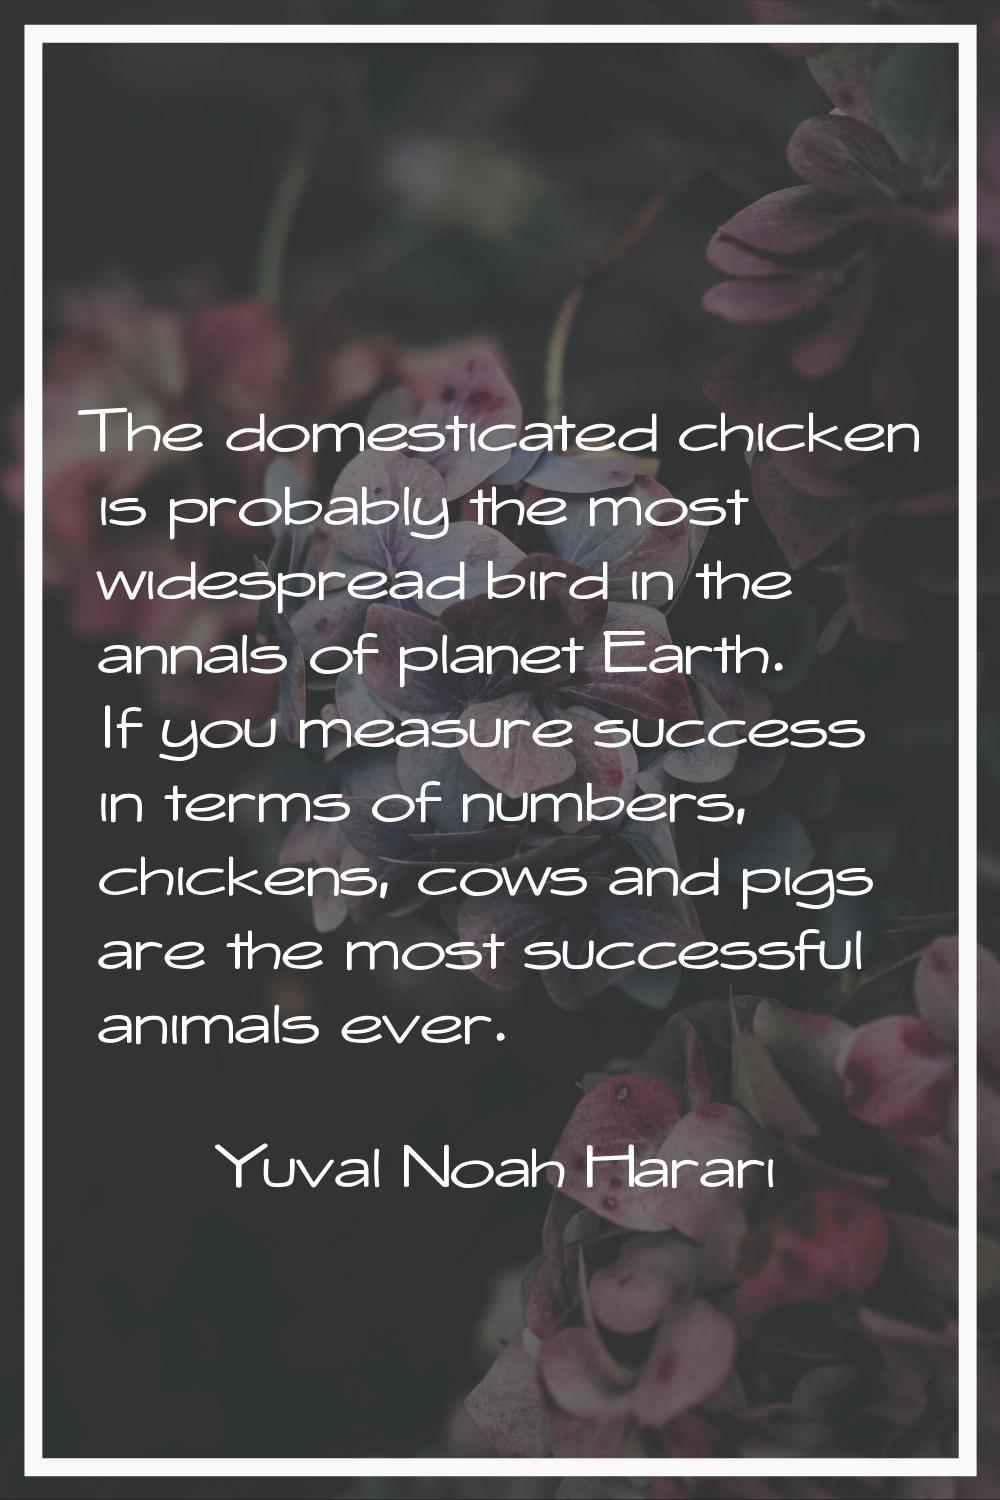 The domesticated chicken is probably the most widespread bird in the annals of planet Earth. If you